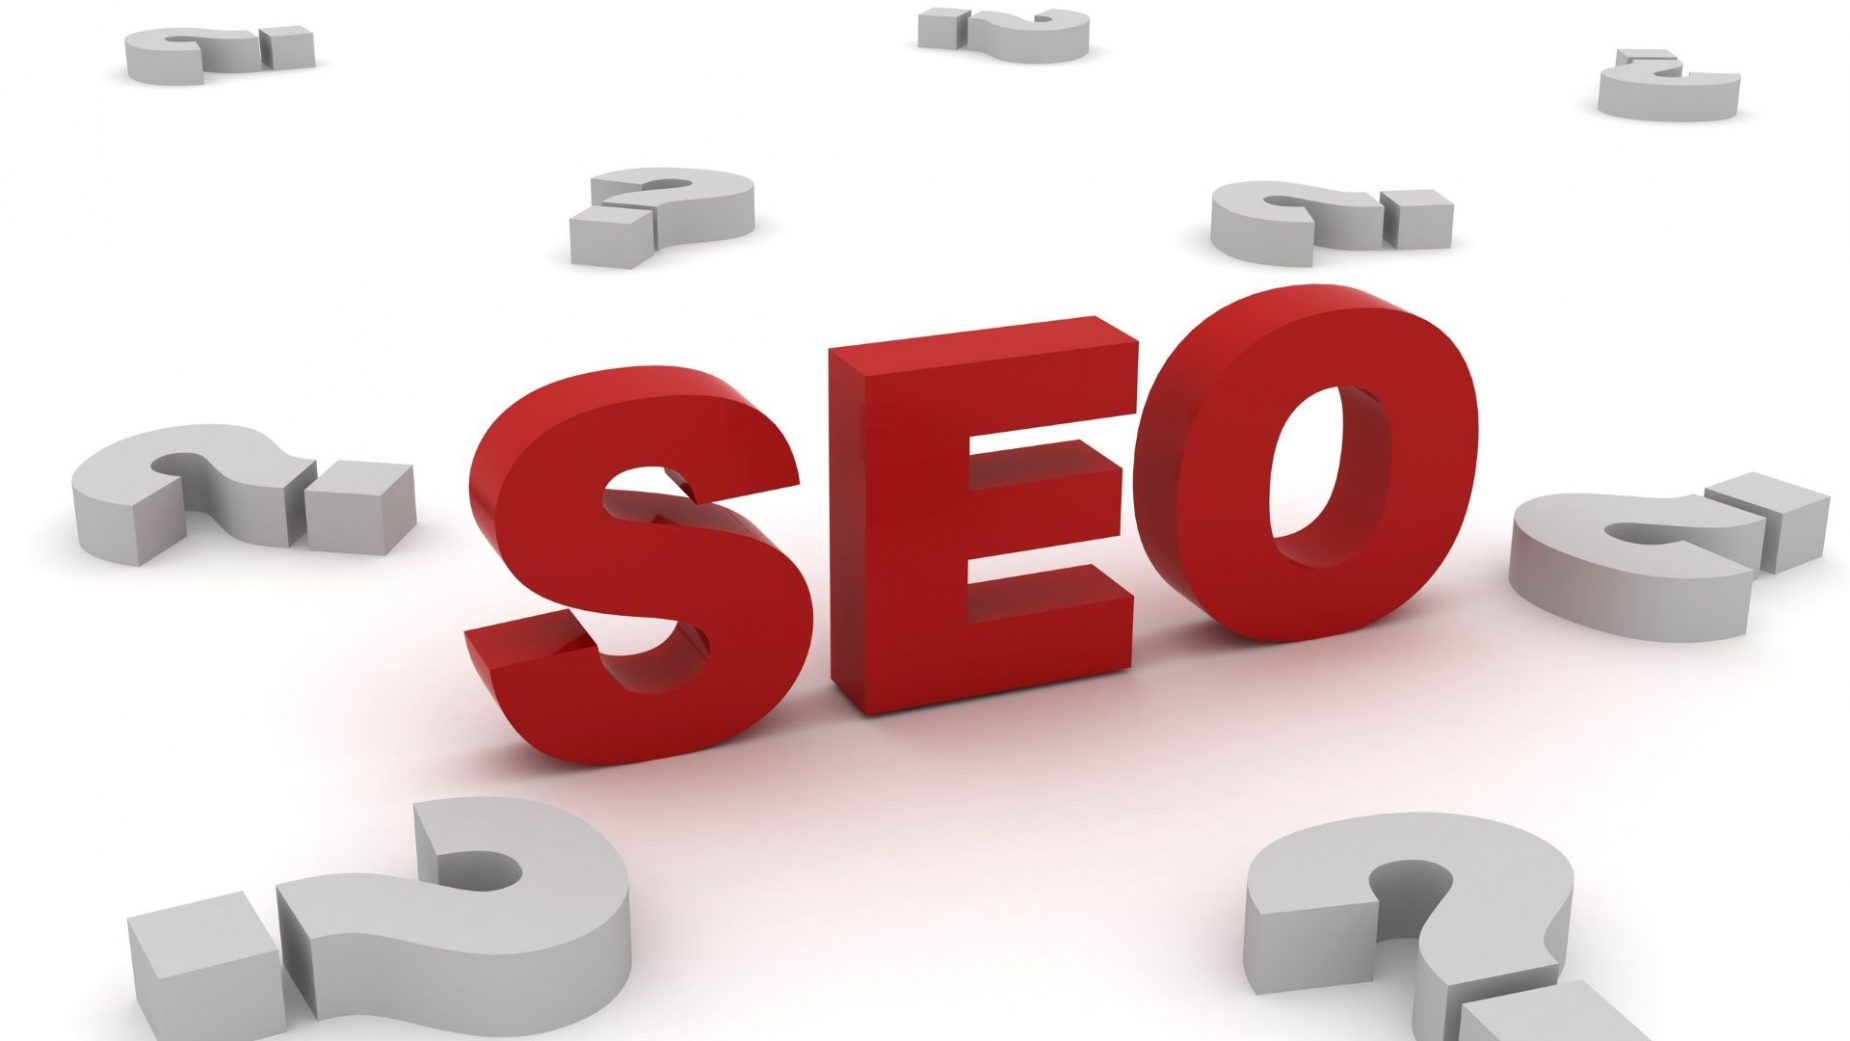 Global Search Engine Optimization Services Market Outlook, Opportunities And Strategies